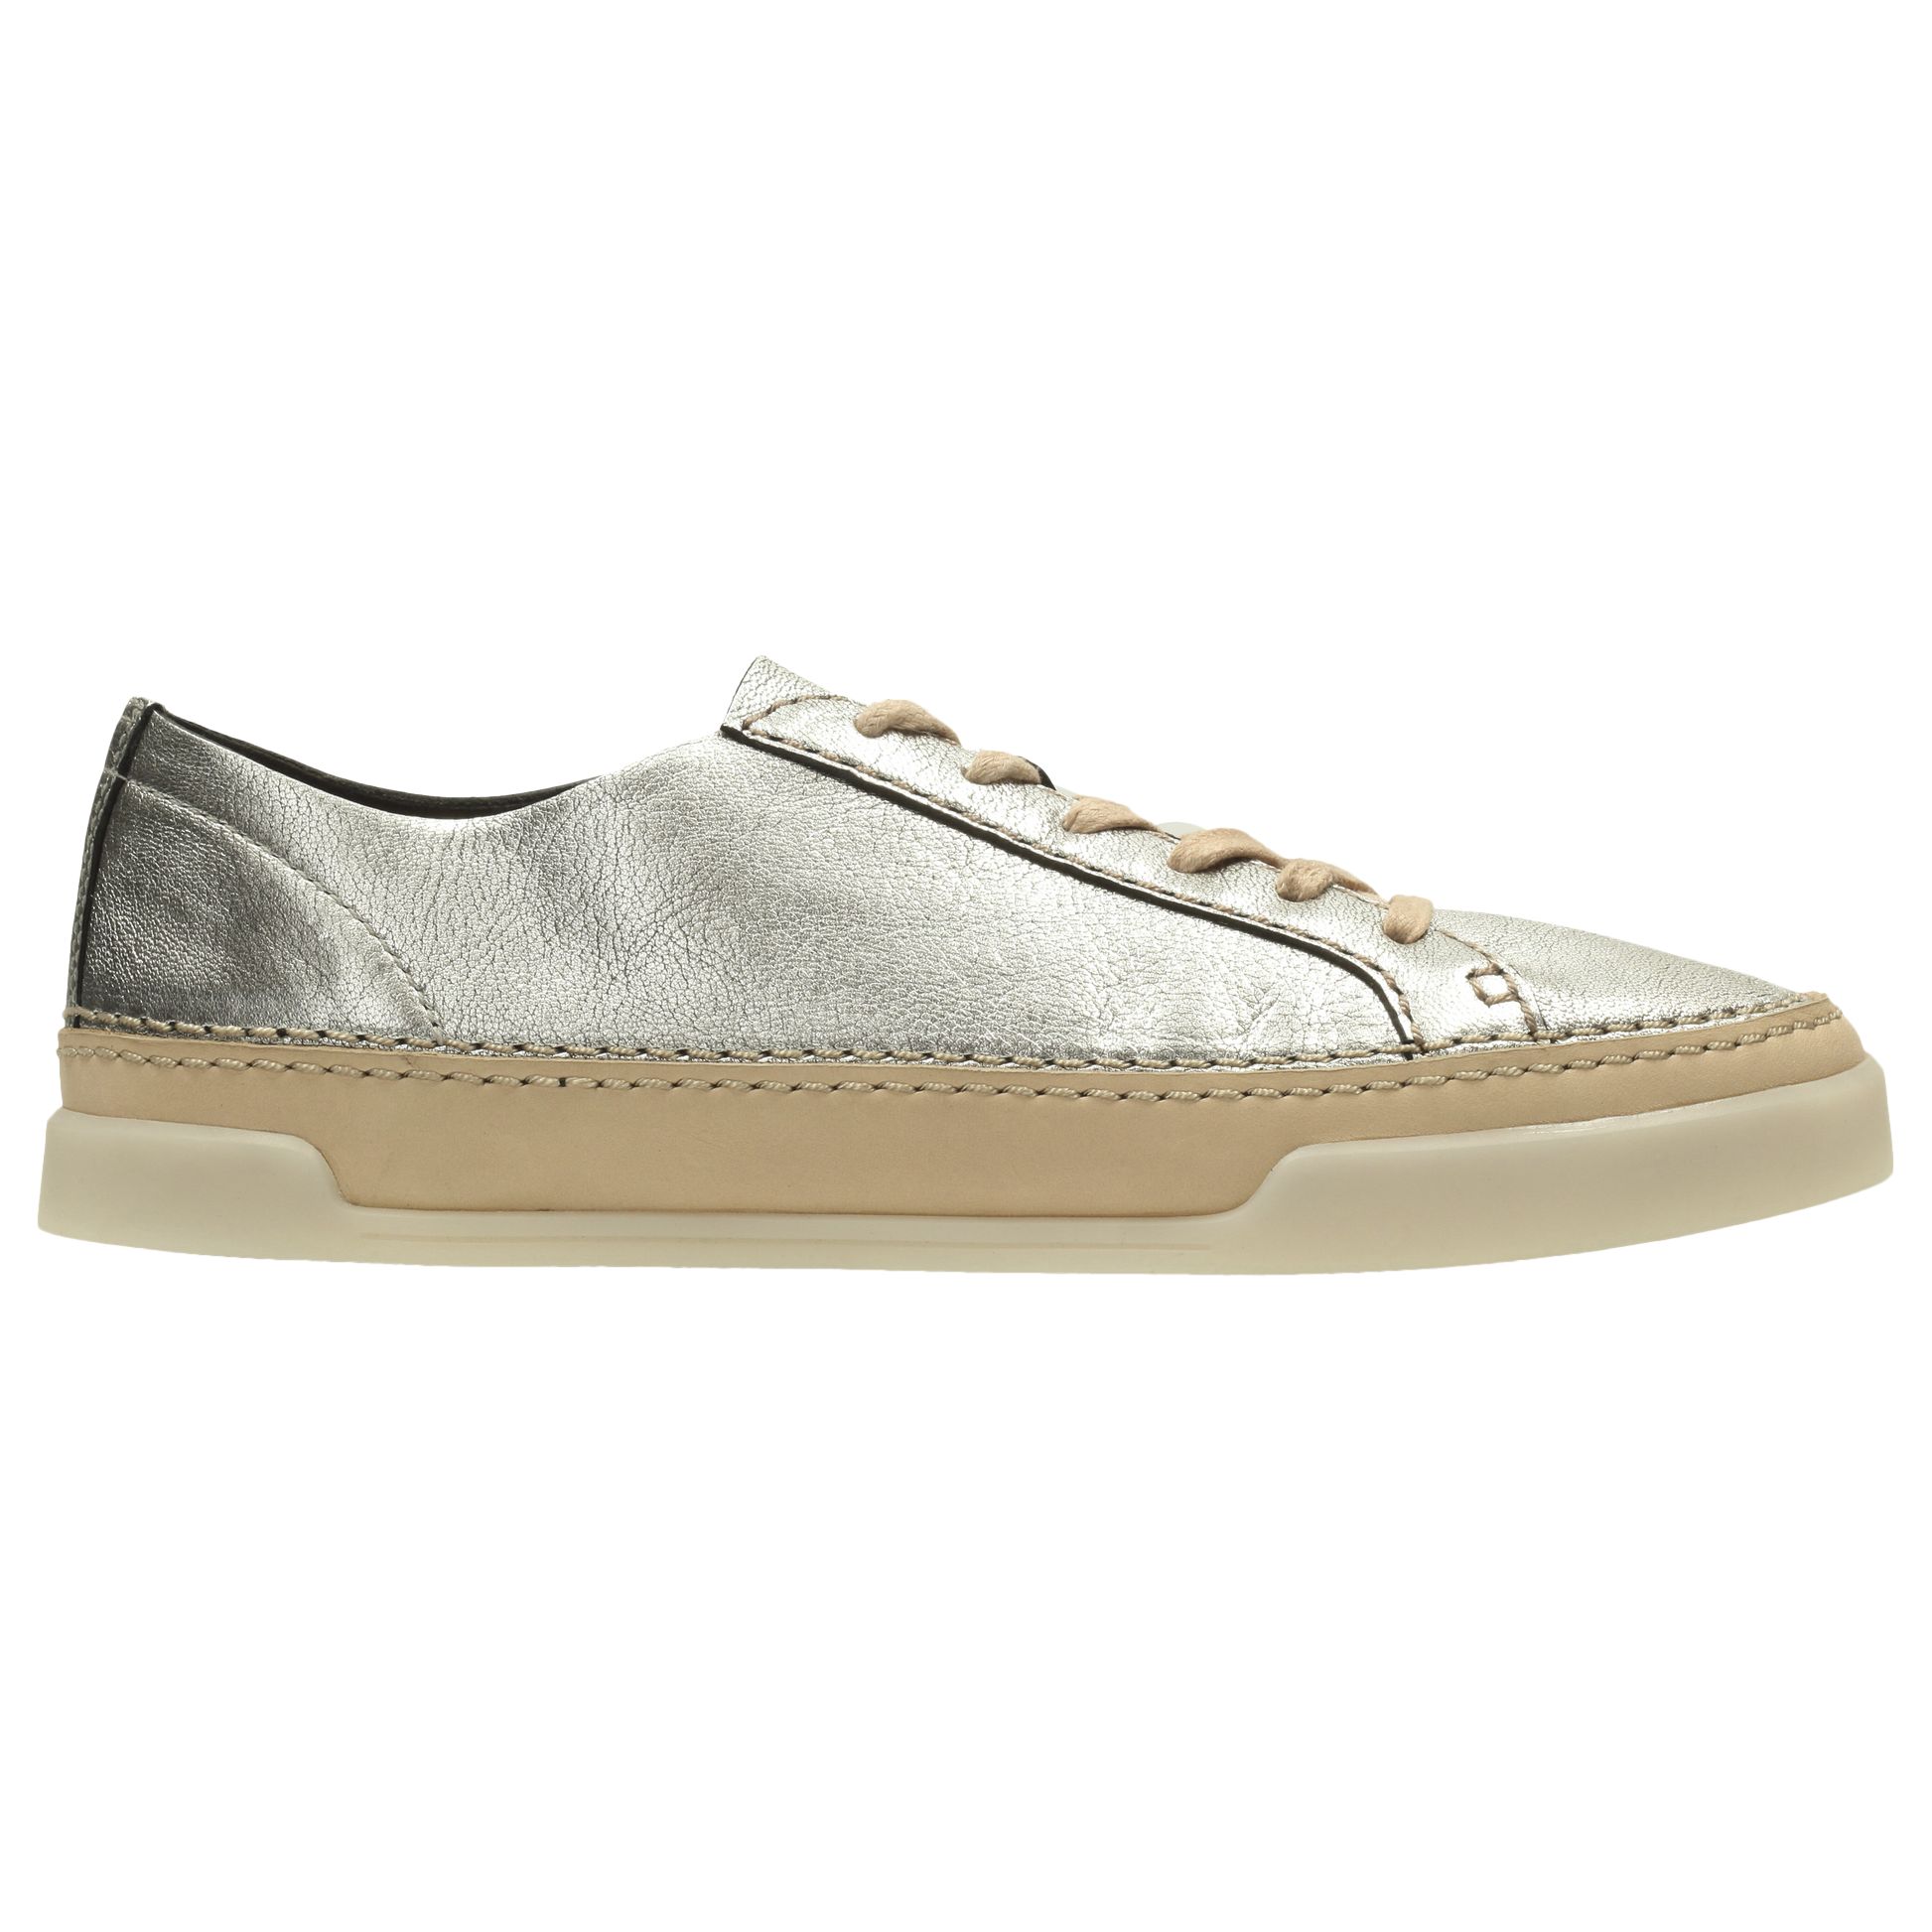 Clarks Hidi Holly Lace Up Trainers, Silver at John Lewis & Partners